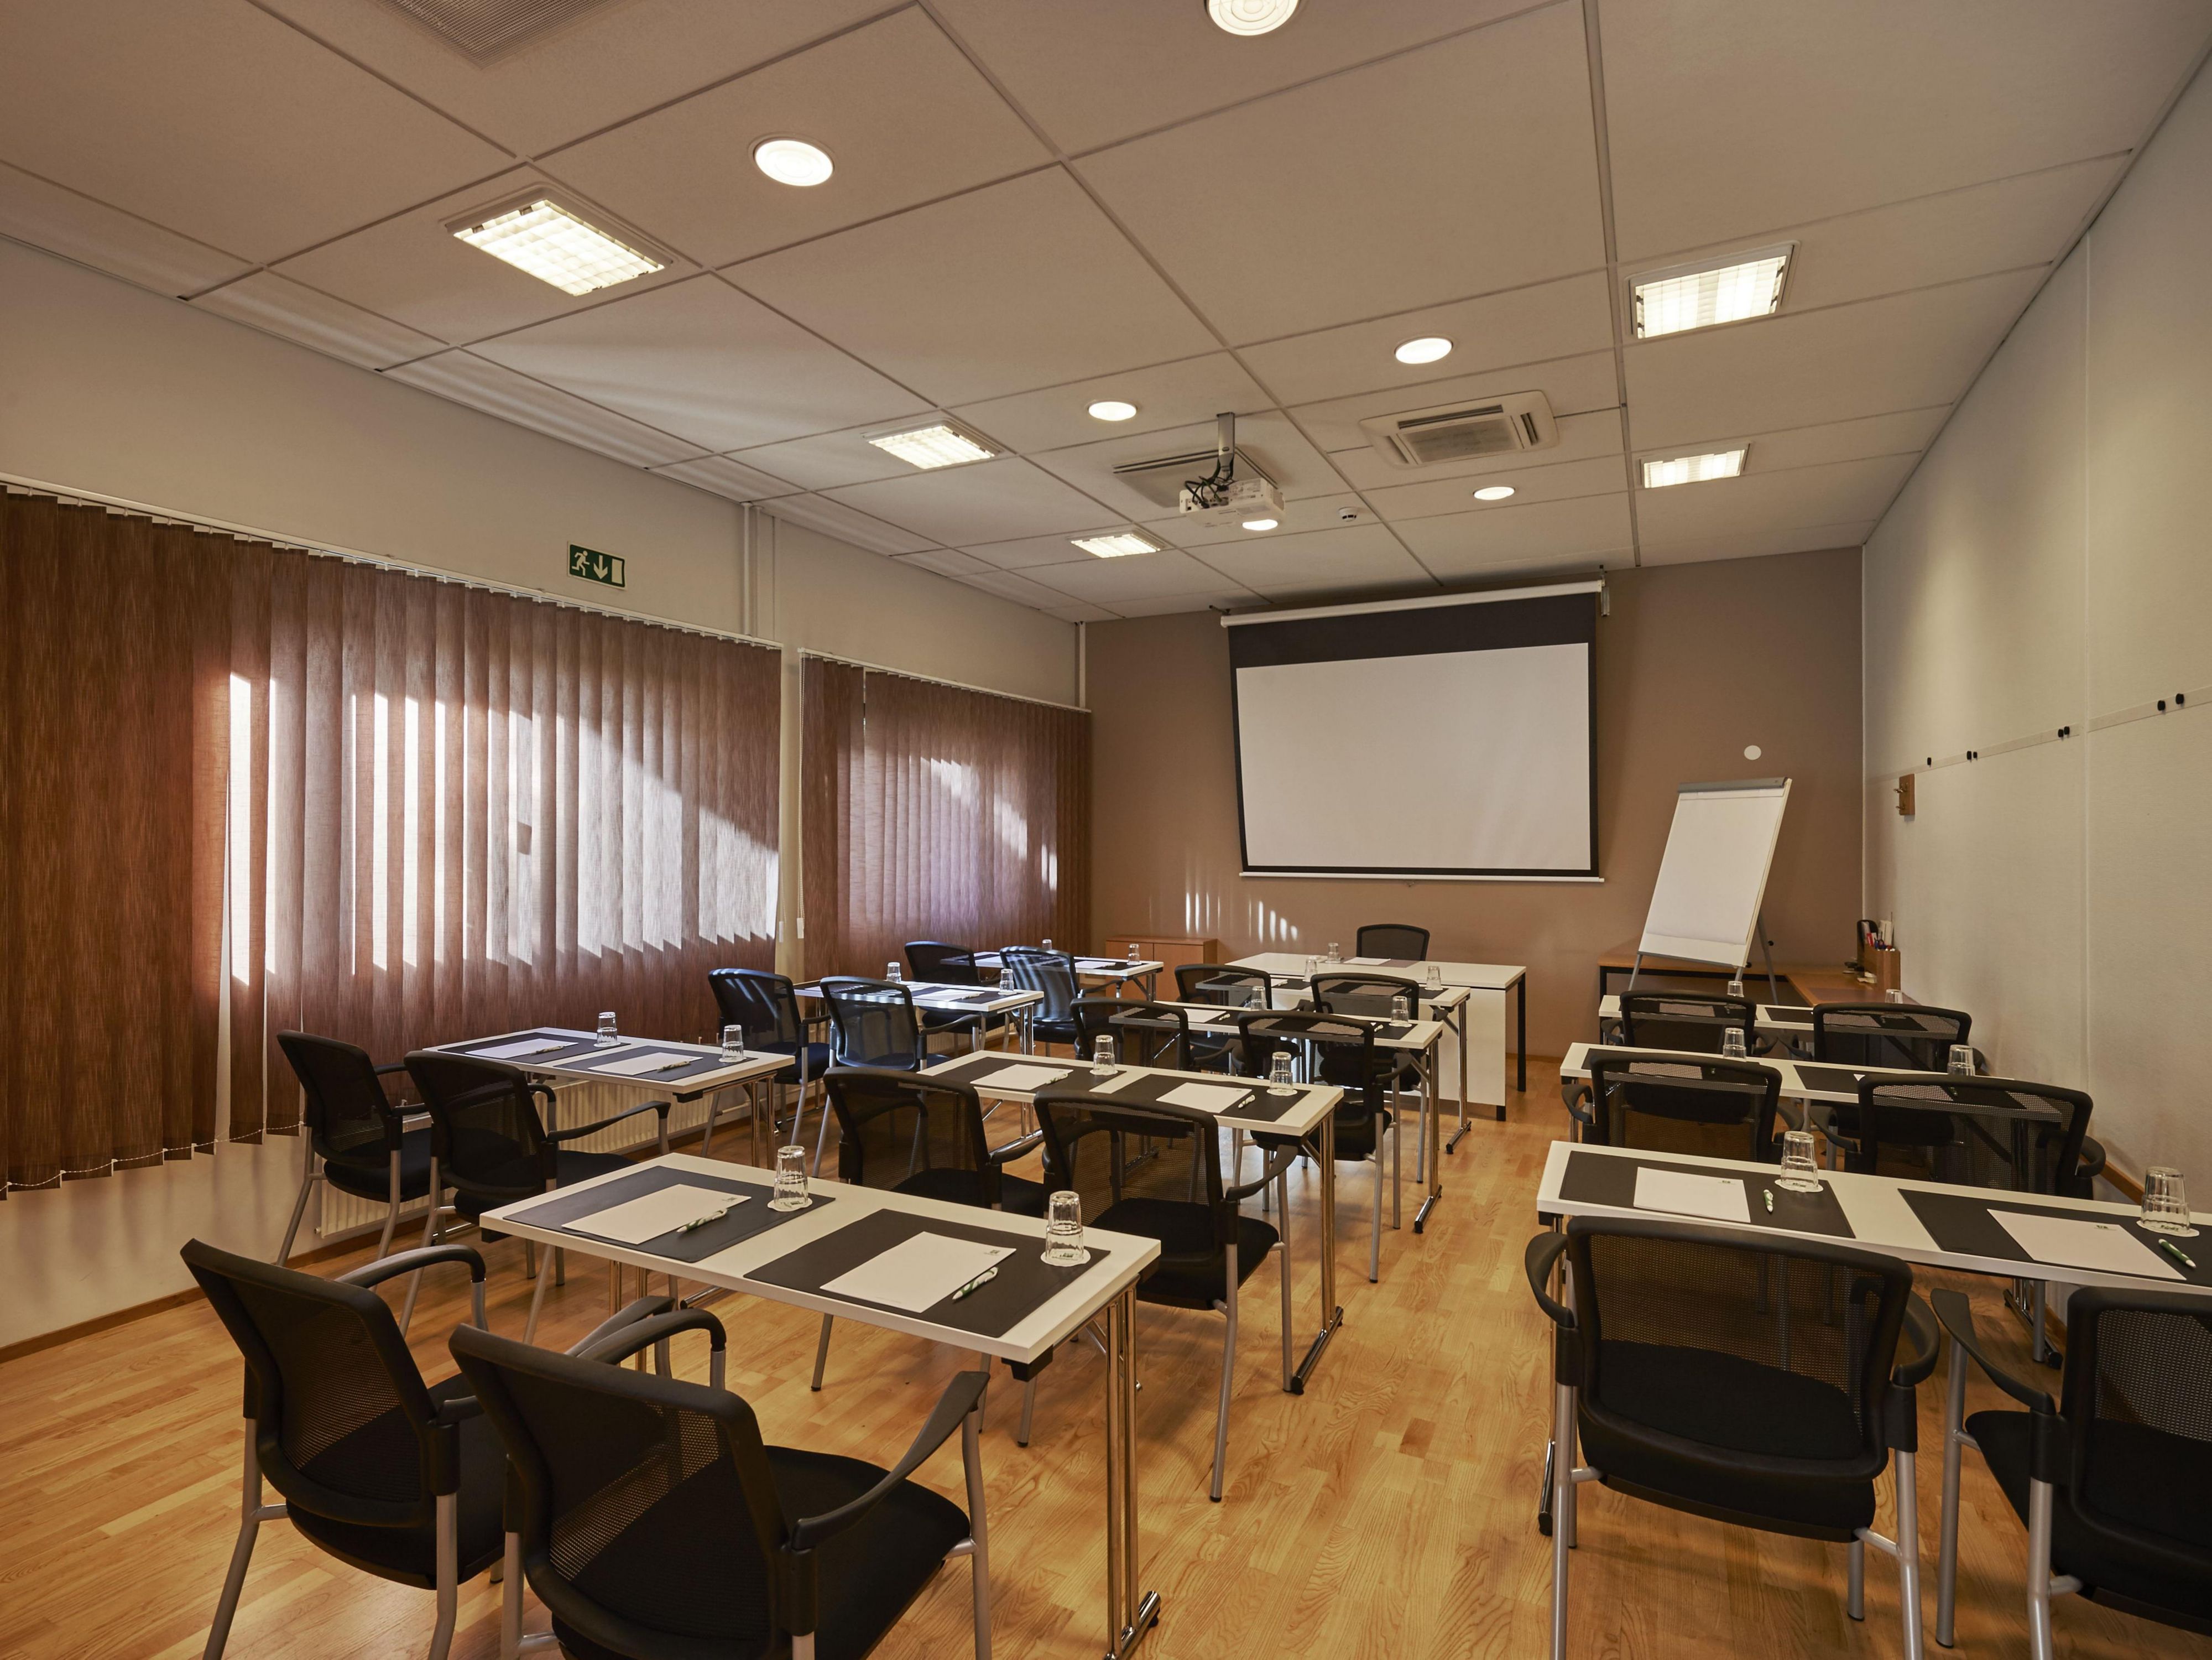 Our location near the Helsinki-Vantaa Airport and Ring Road III makes the hotel an easy to get meeting point. Whether you arrive with us by airplane or car, it is easy to reach our hotel.
Our hotel’s seven meeting rooms work well for groups of 2 to 26 people. All our meeting rooms have a complimentary internet access. Contact us for more details.